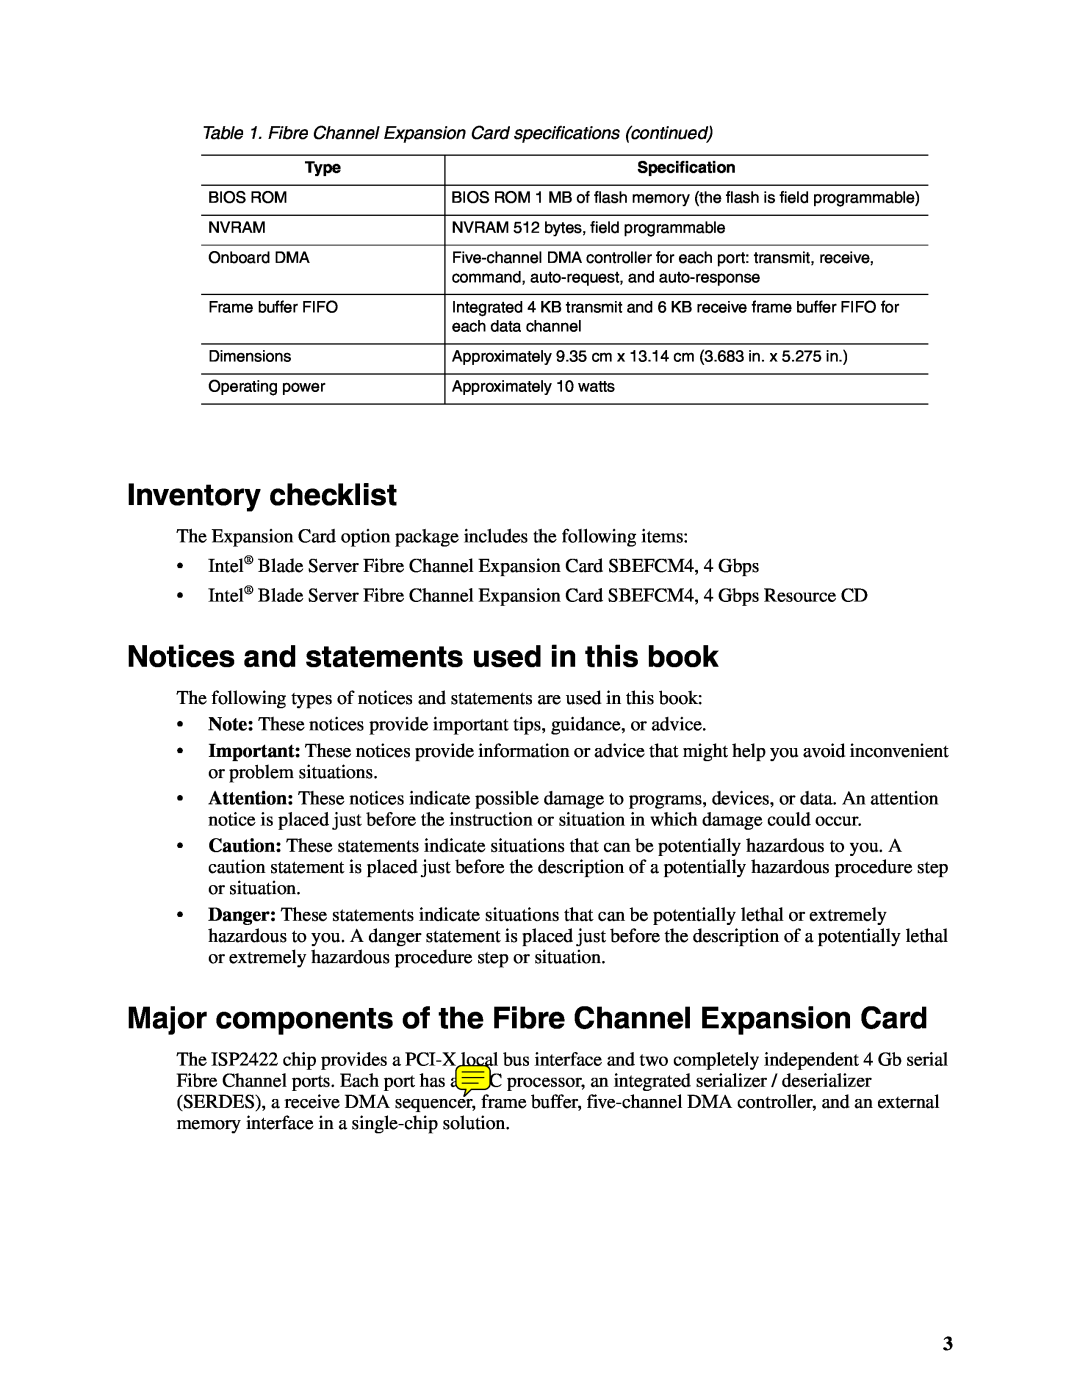 Intel SEBFCM4 manual Inventory checklist, Notices and statements used in this book 